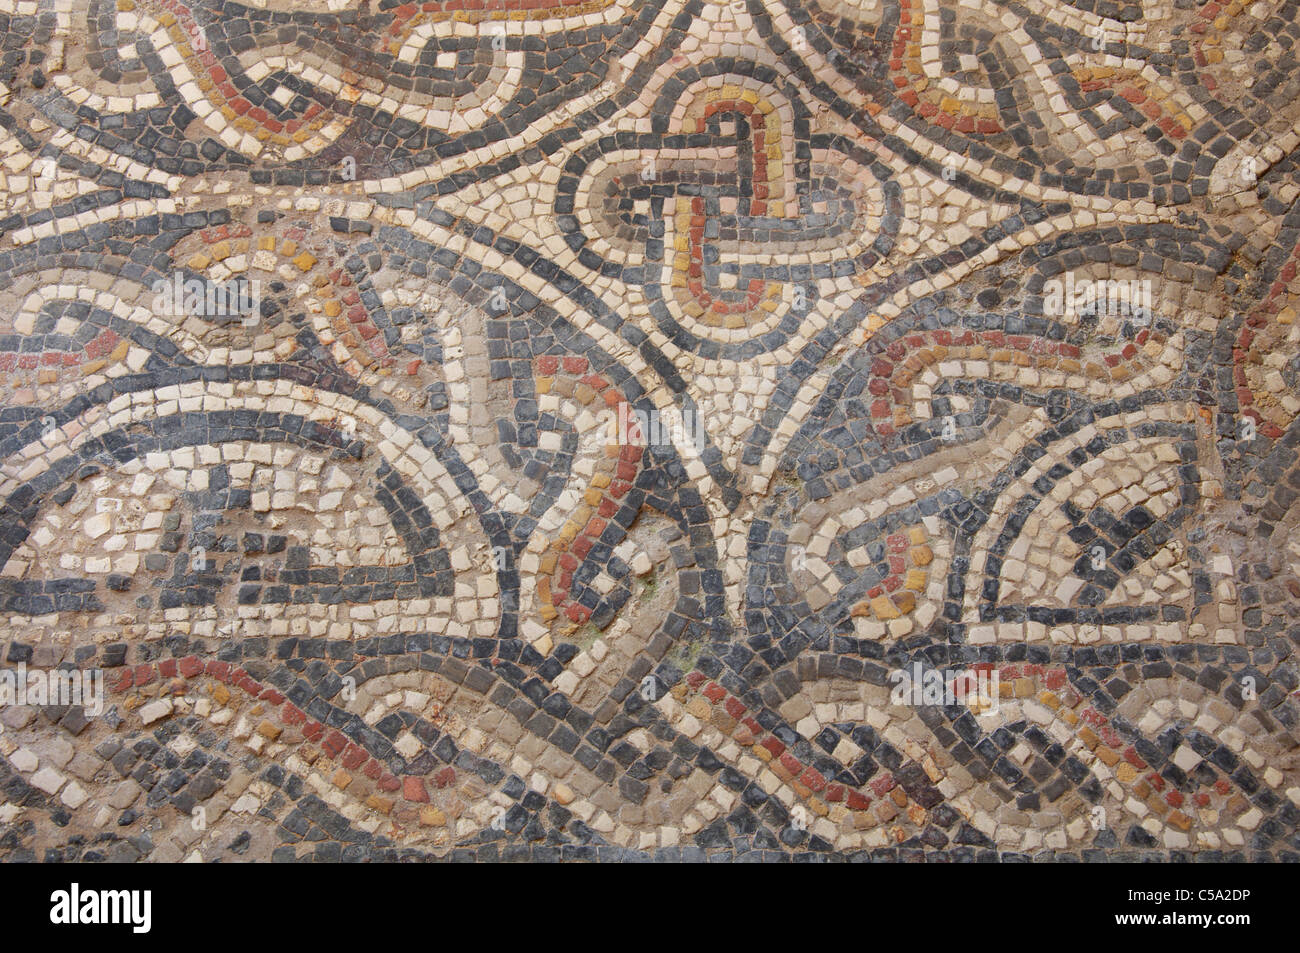 Detail of a Roman mosaic floor in the preserved remains of a 4th century Romano-British townhouse in Dorchester. Dorset, England, United Kingdom. Stock Photo